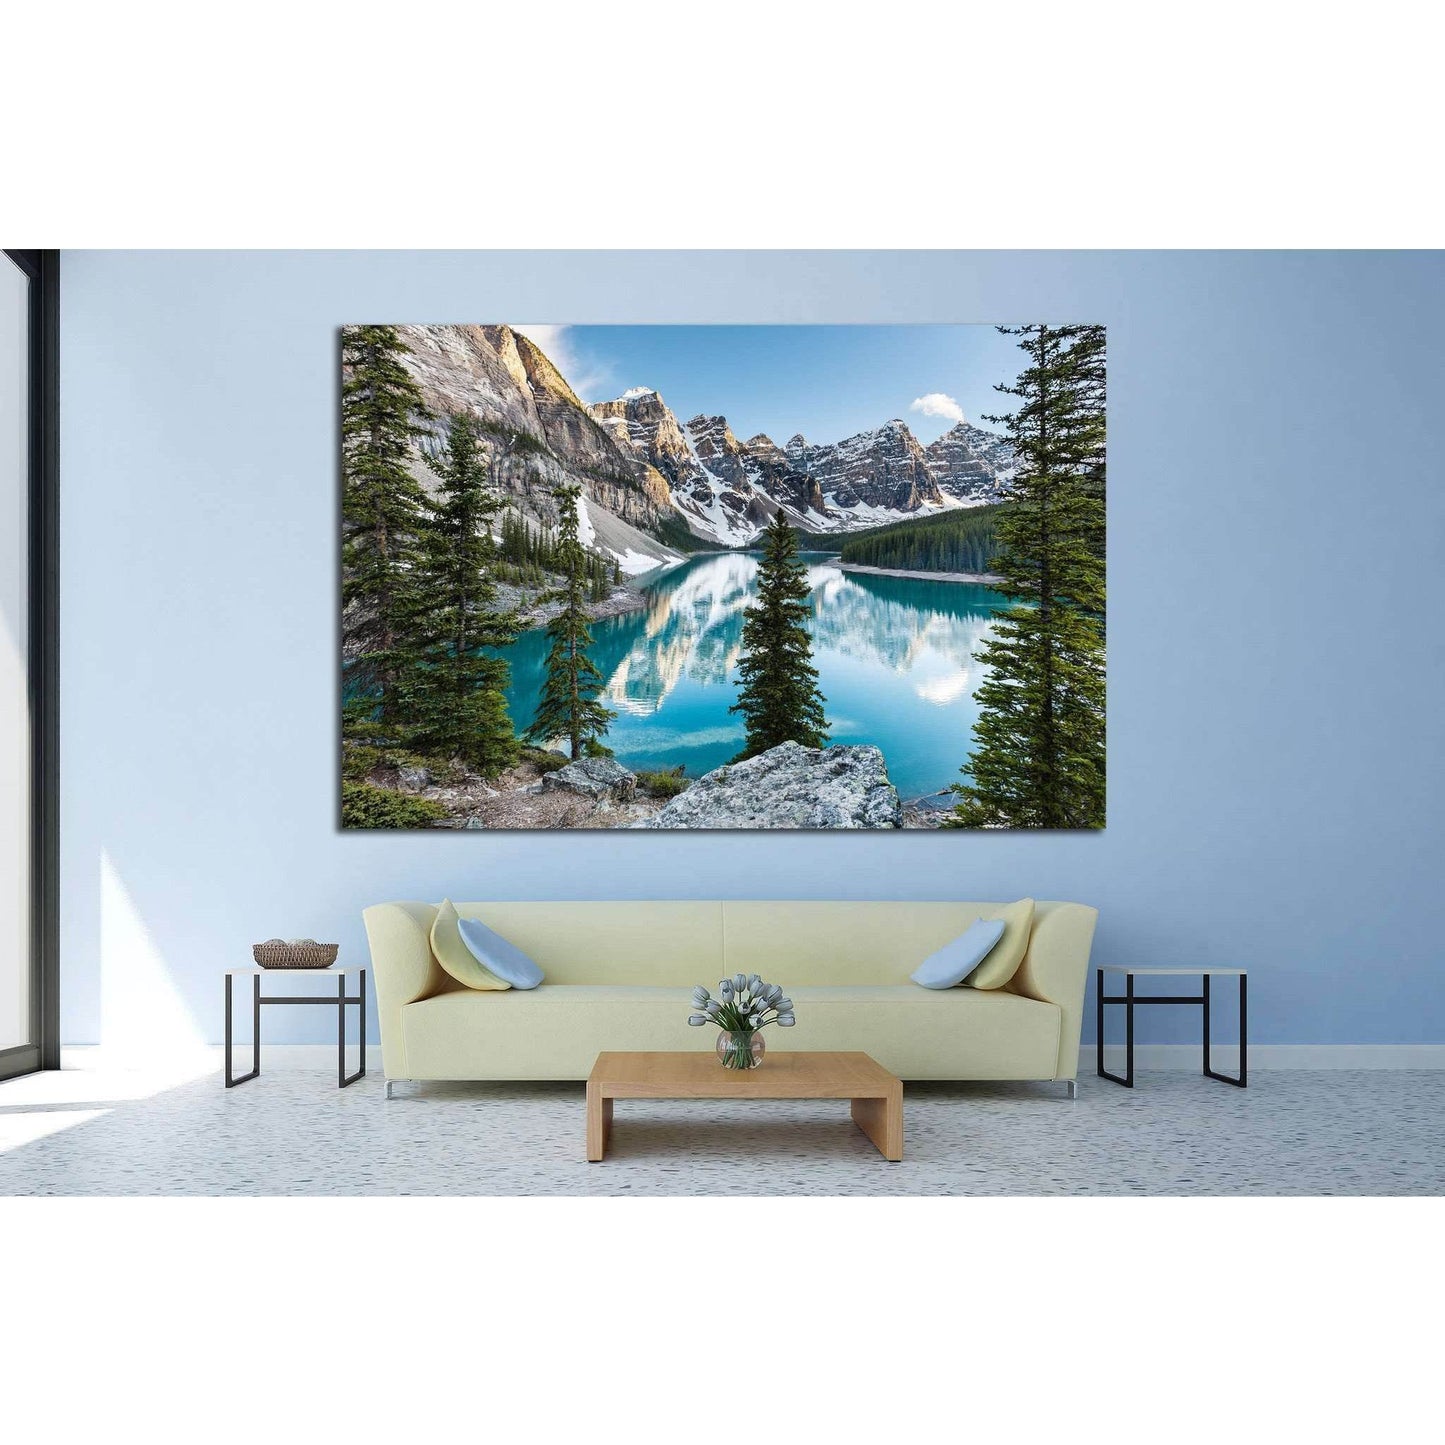 Banff National Park Moraine Lake Canvas Print for Modern Office DecorThis canvas print displays the serene beauty of Moraine Lake in Banff National Park, Canada. The tranquil turquoise waters, set against the backdrop of the majestic Rocky Mountains and l